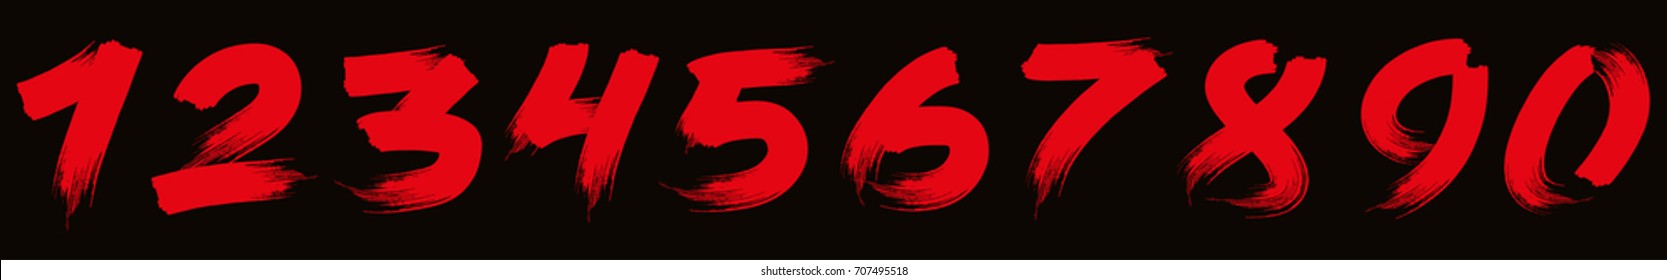 Red brushstroke numbers on black background.